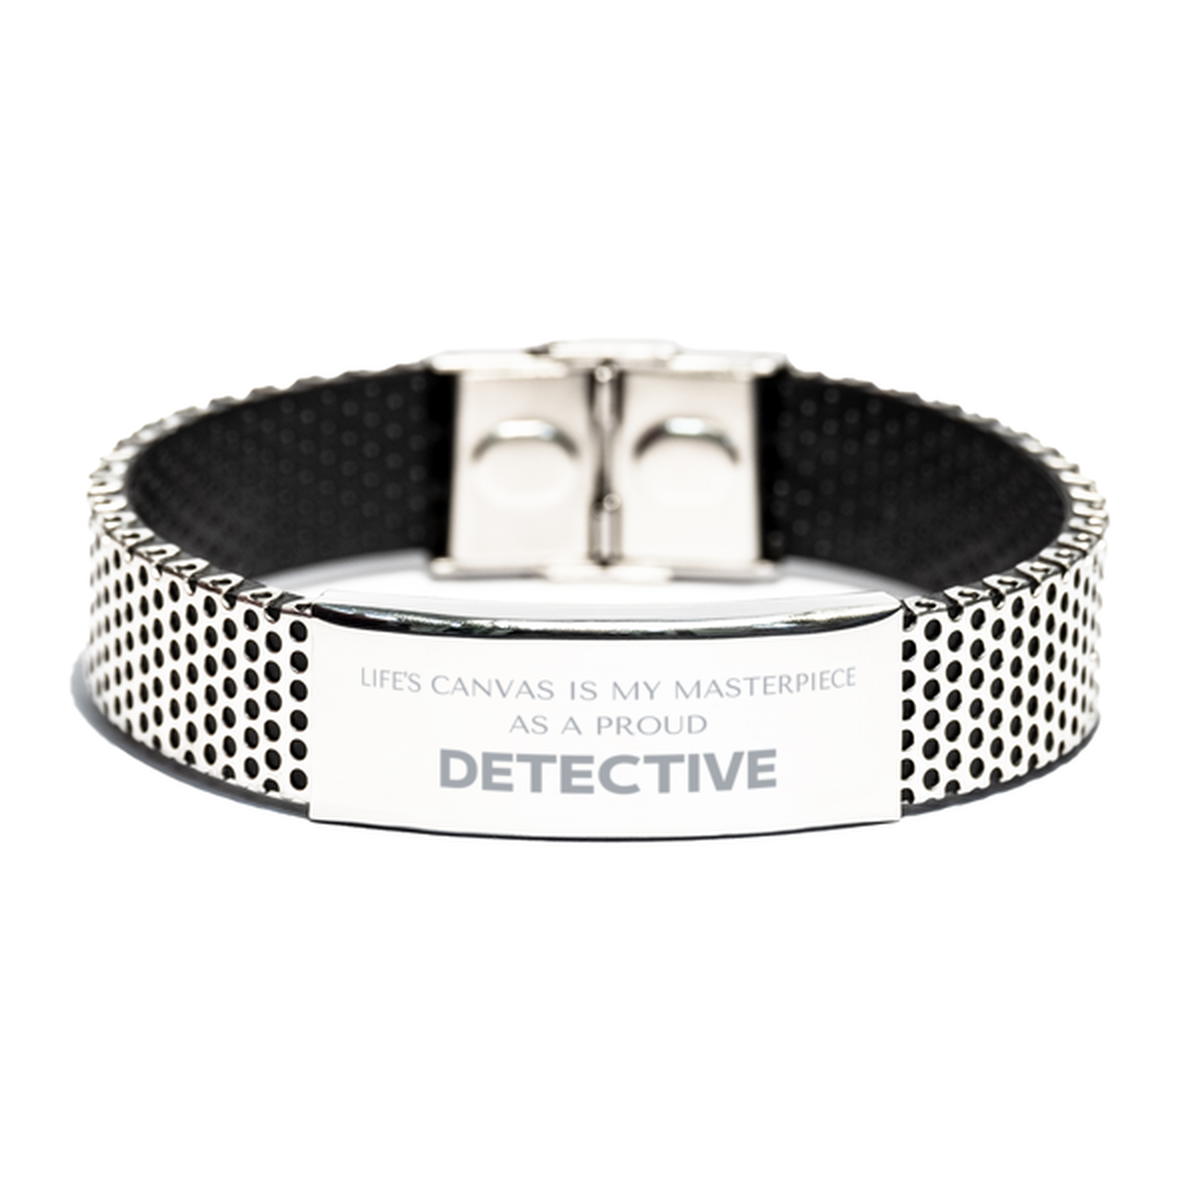 Proud Detective Gifts, Life's canvas is my masterpiece, Epic Birthday Christmas Unique Stainless Steel Bracelet For Detective, Coworkers, Men, Women, Friends